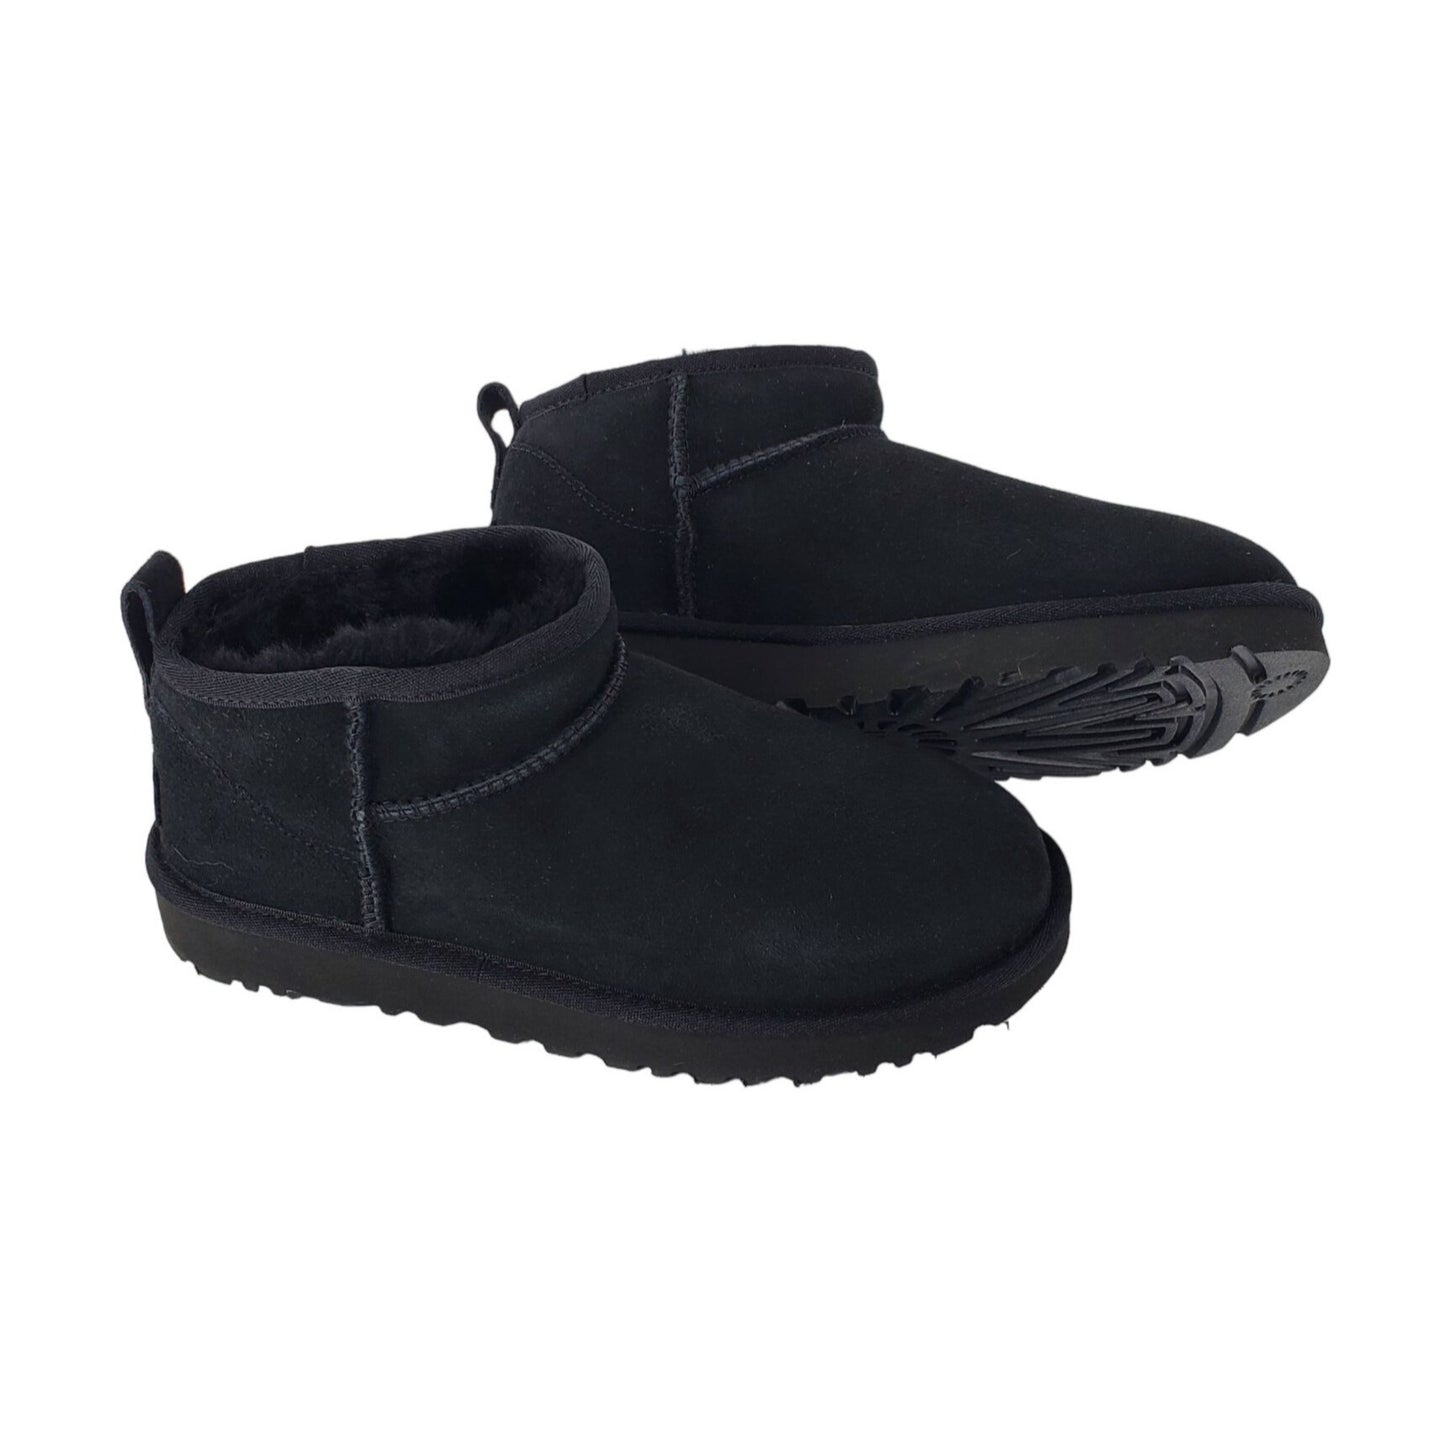 Ugg Classic Ultra Mini Boots Womens Suede Fur Ankle Slip-on Shoes Black